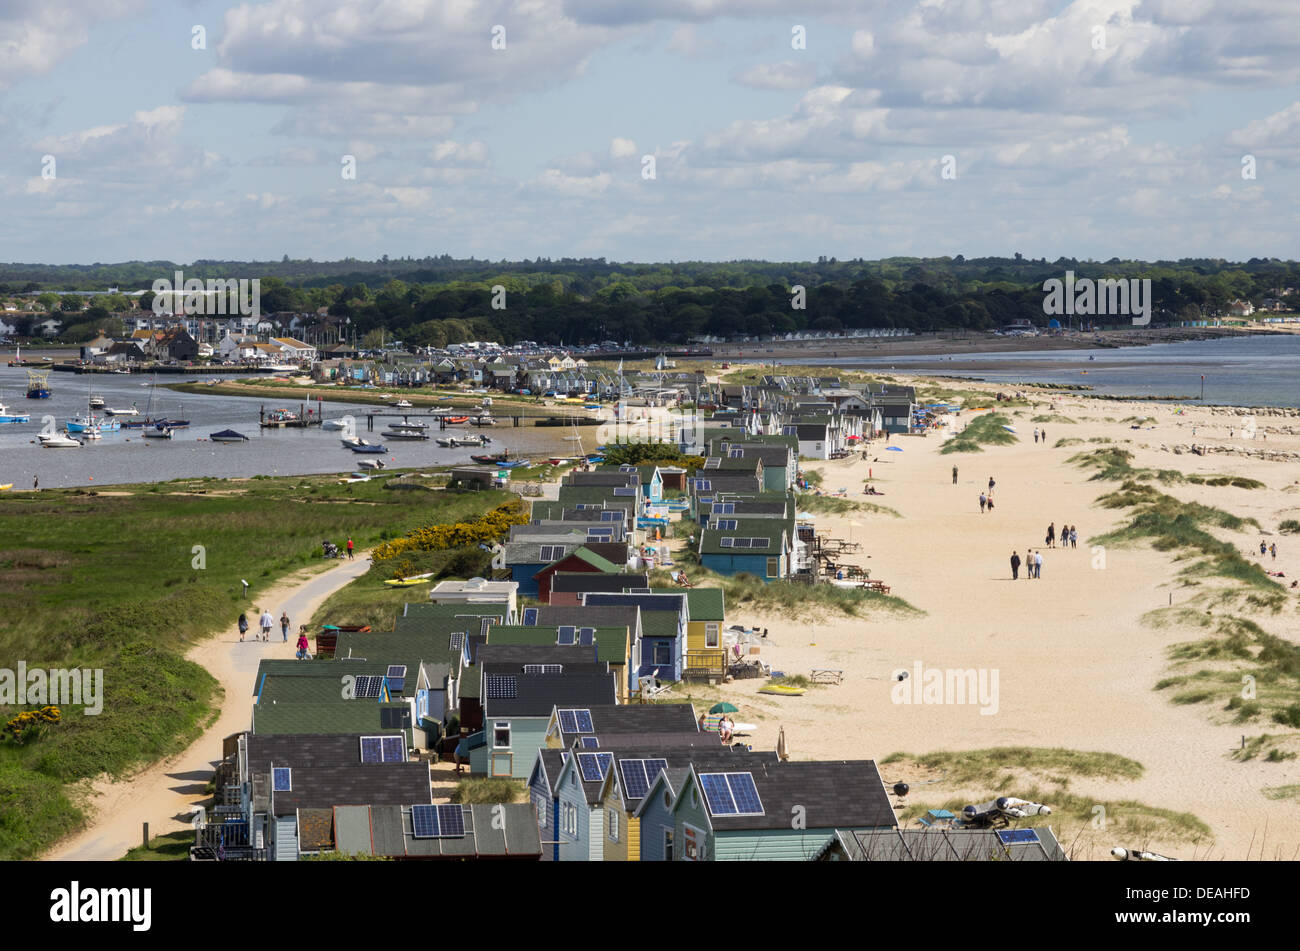 A view of Hangistbury head towards Mudeford with holiday-makers walking in the dunes along the many beach-huts. Stock Photo